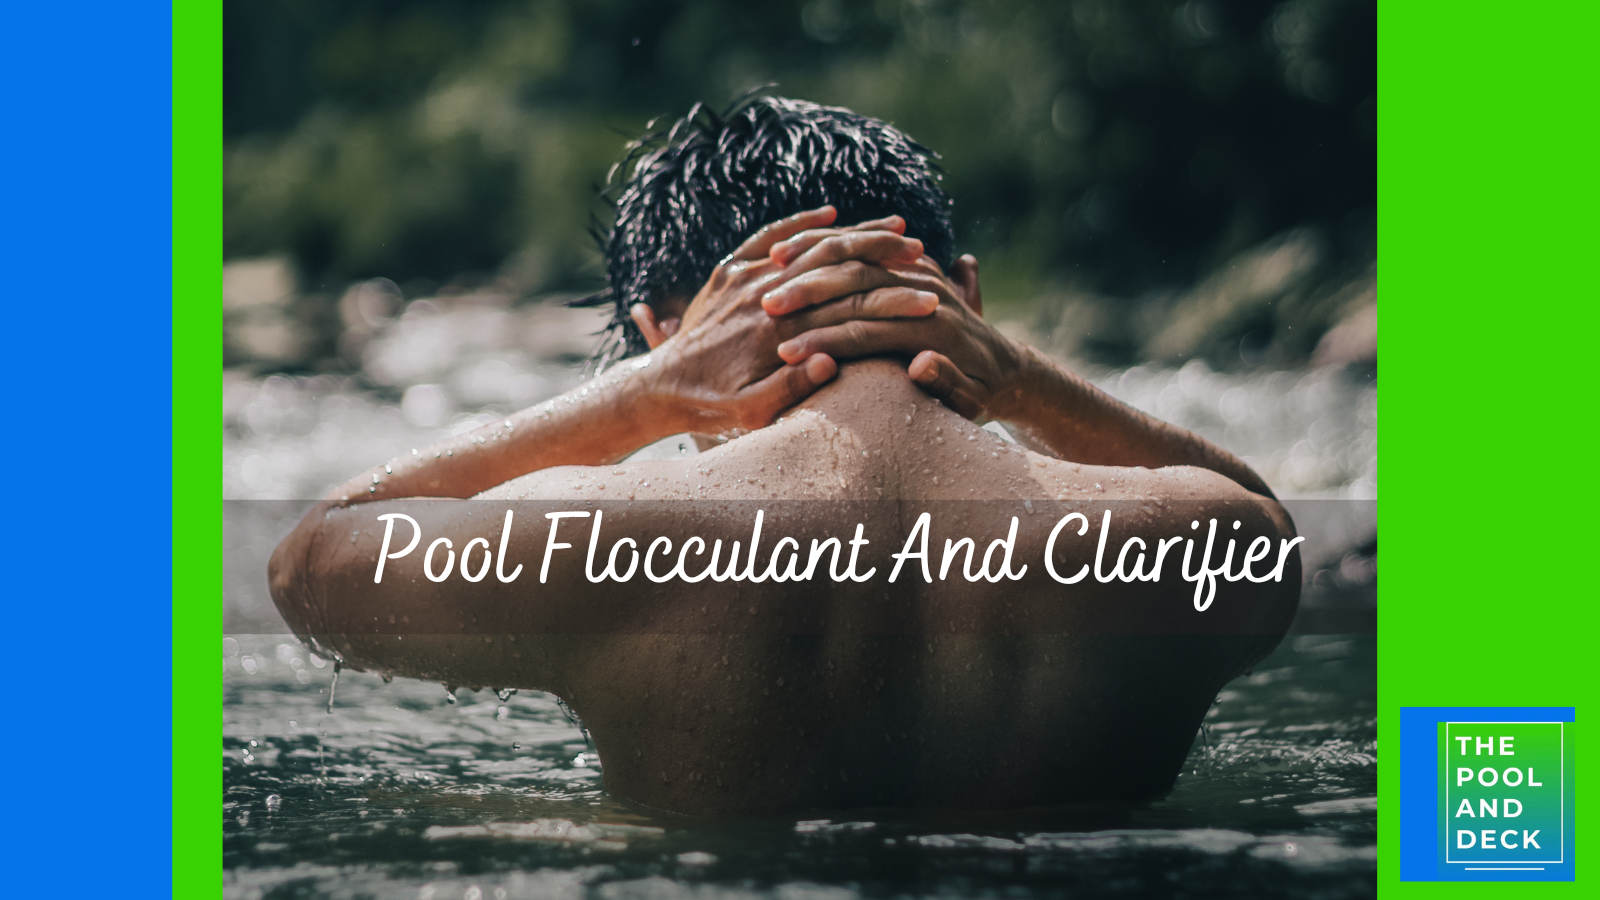 How To Use Pool Flocculant And Clarifier? (The Best Advice!)